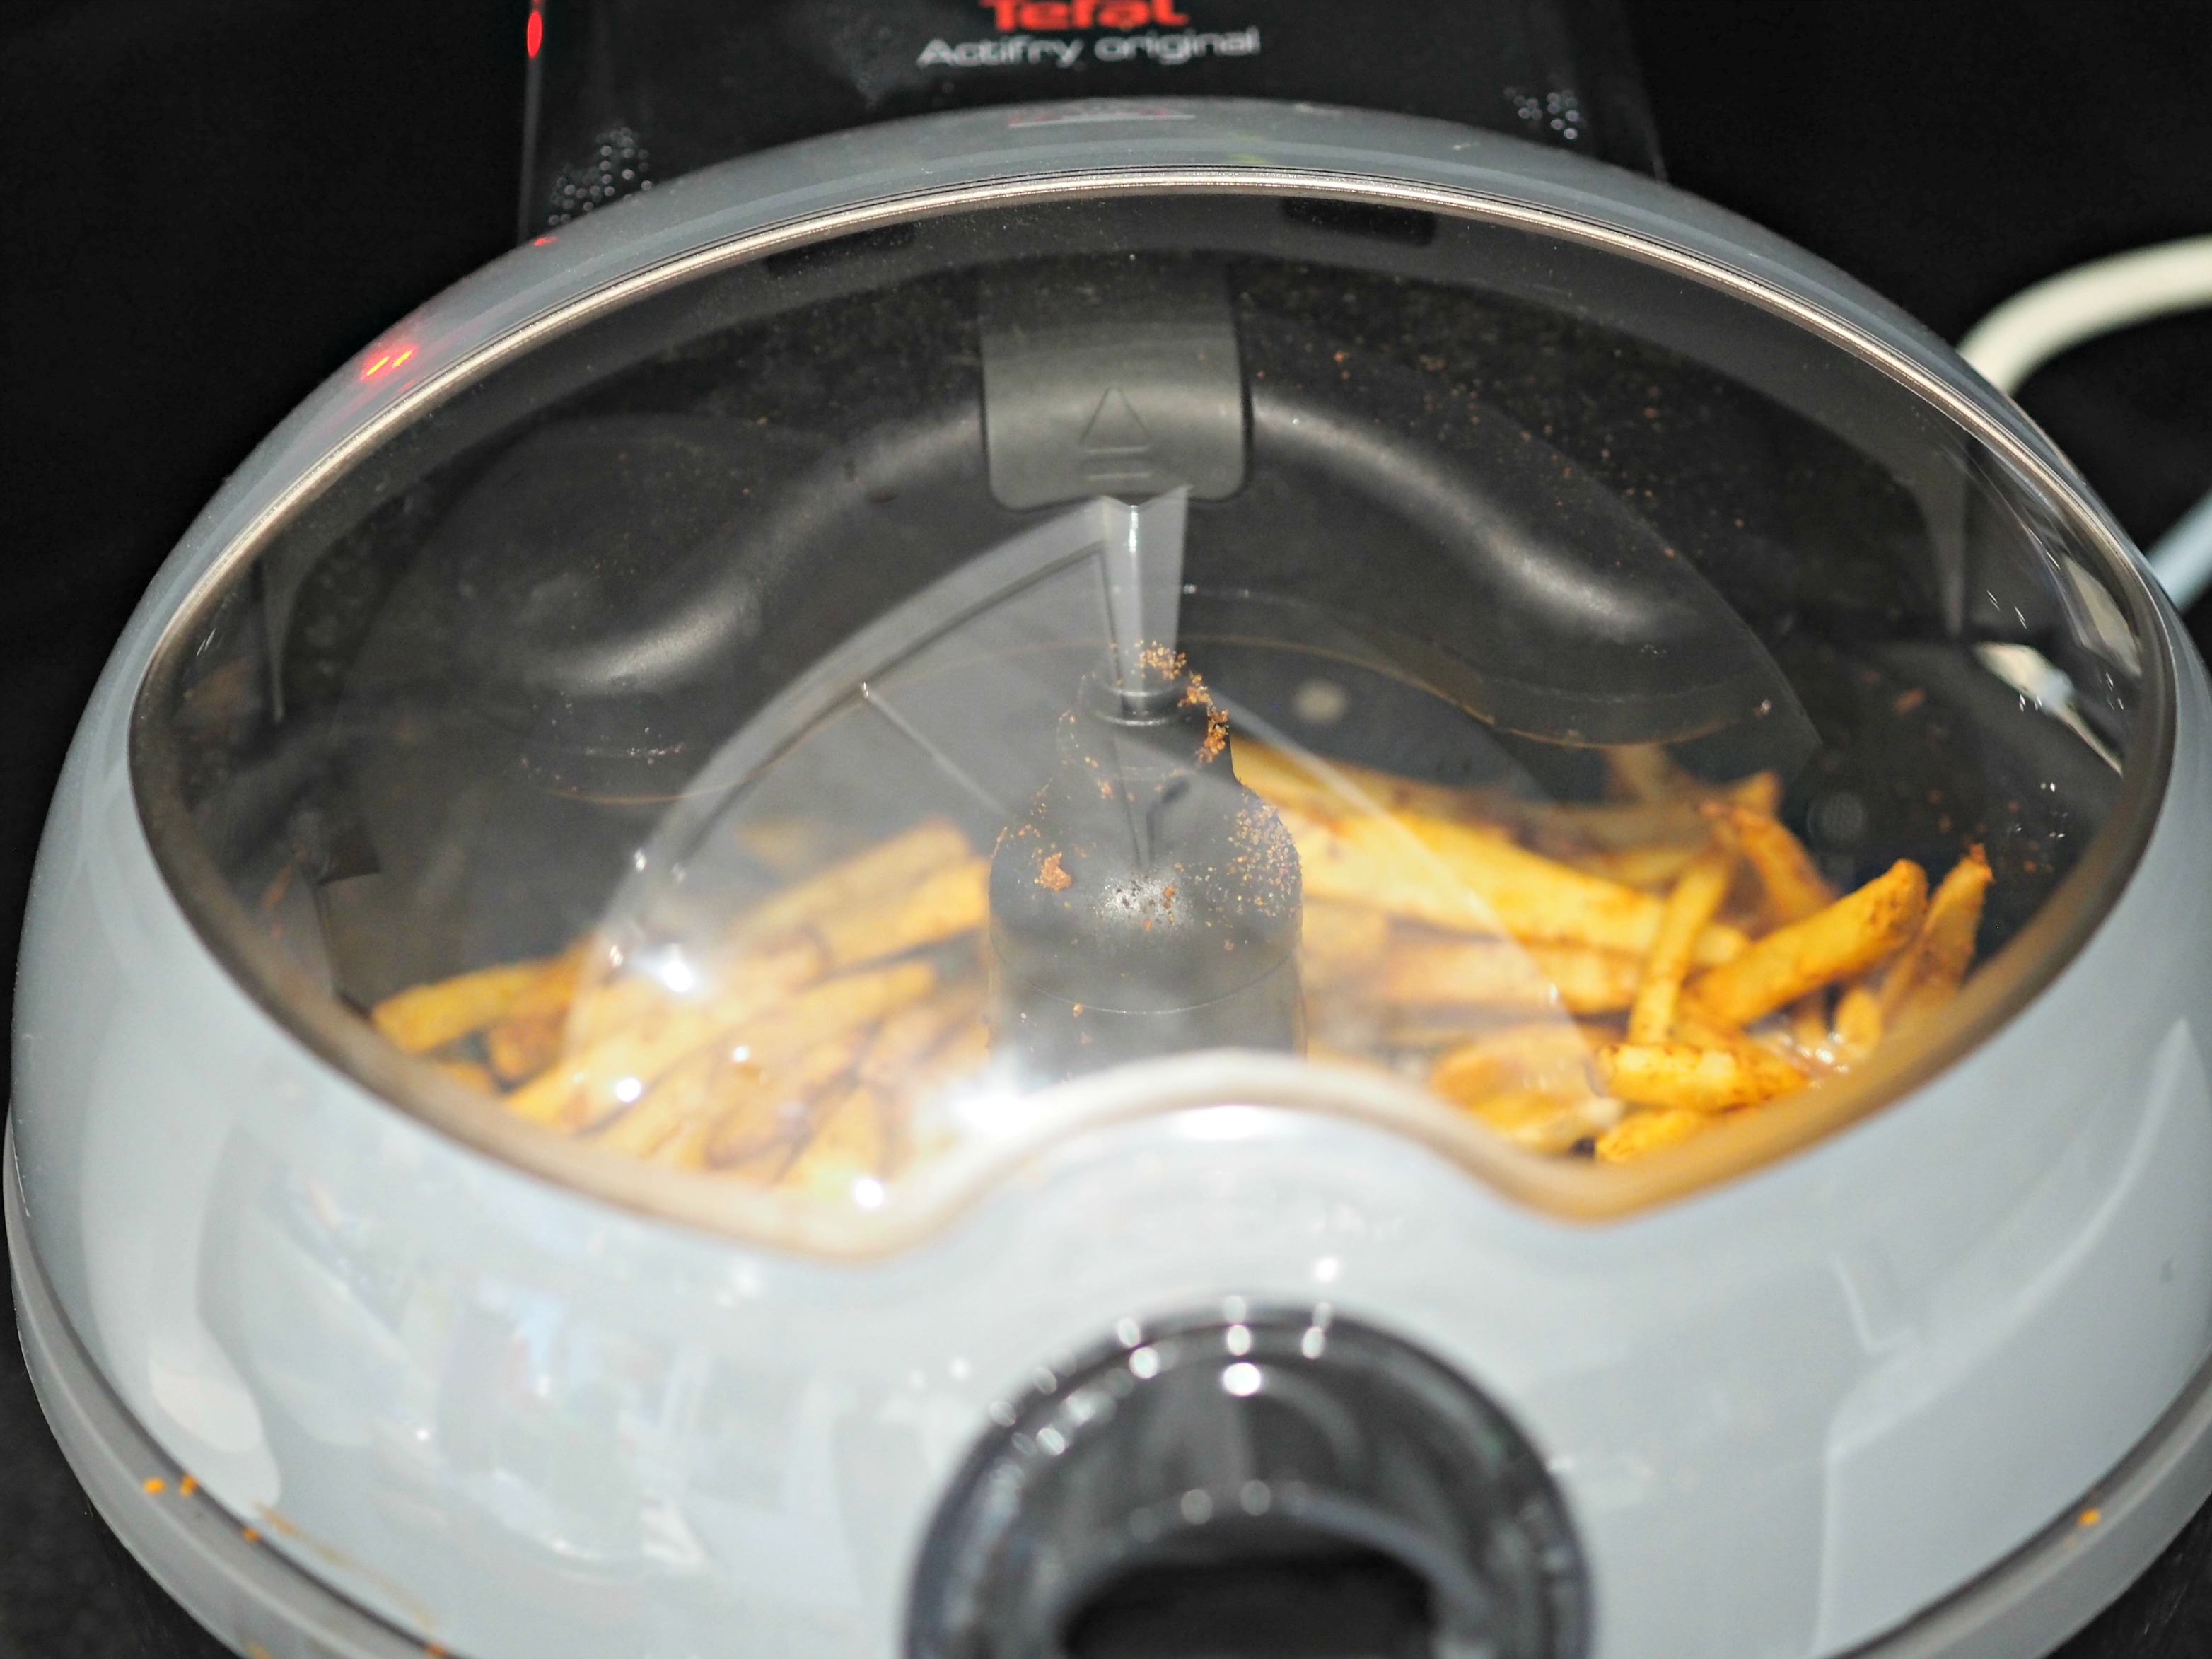 Tefal ActiFry Review